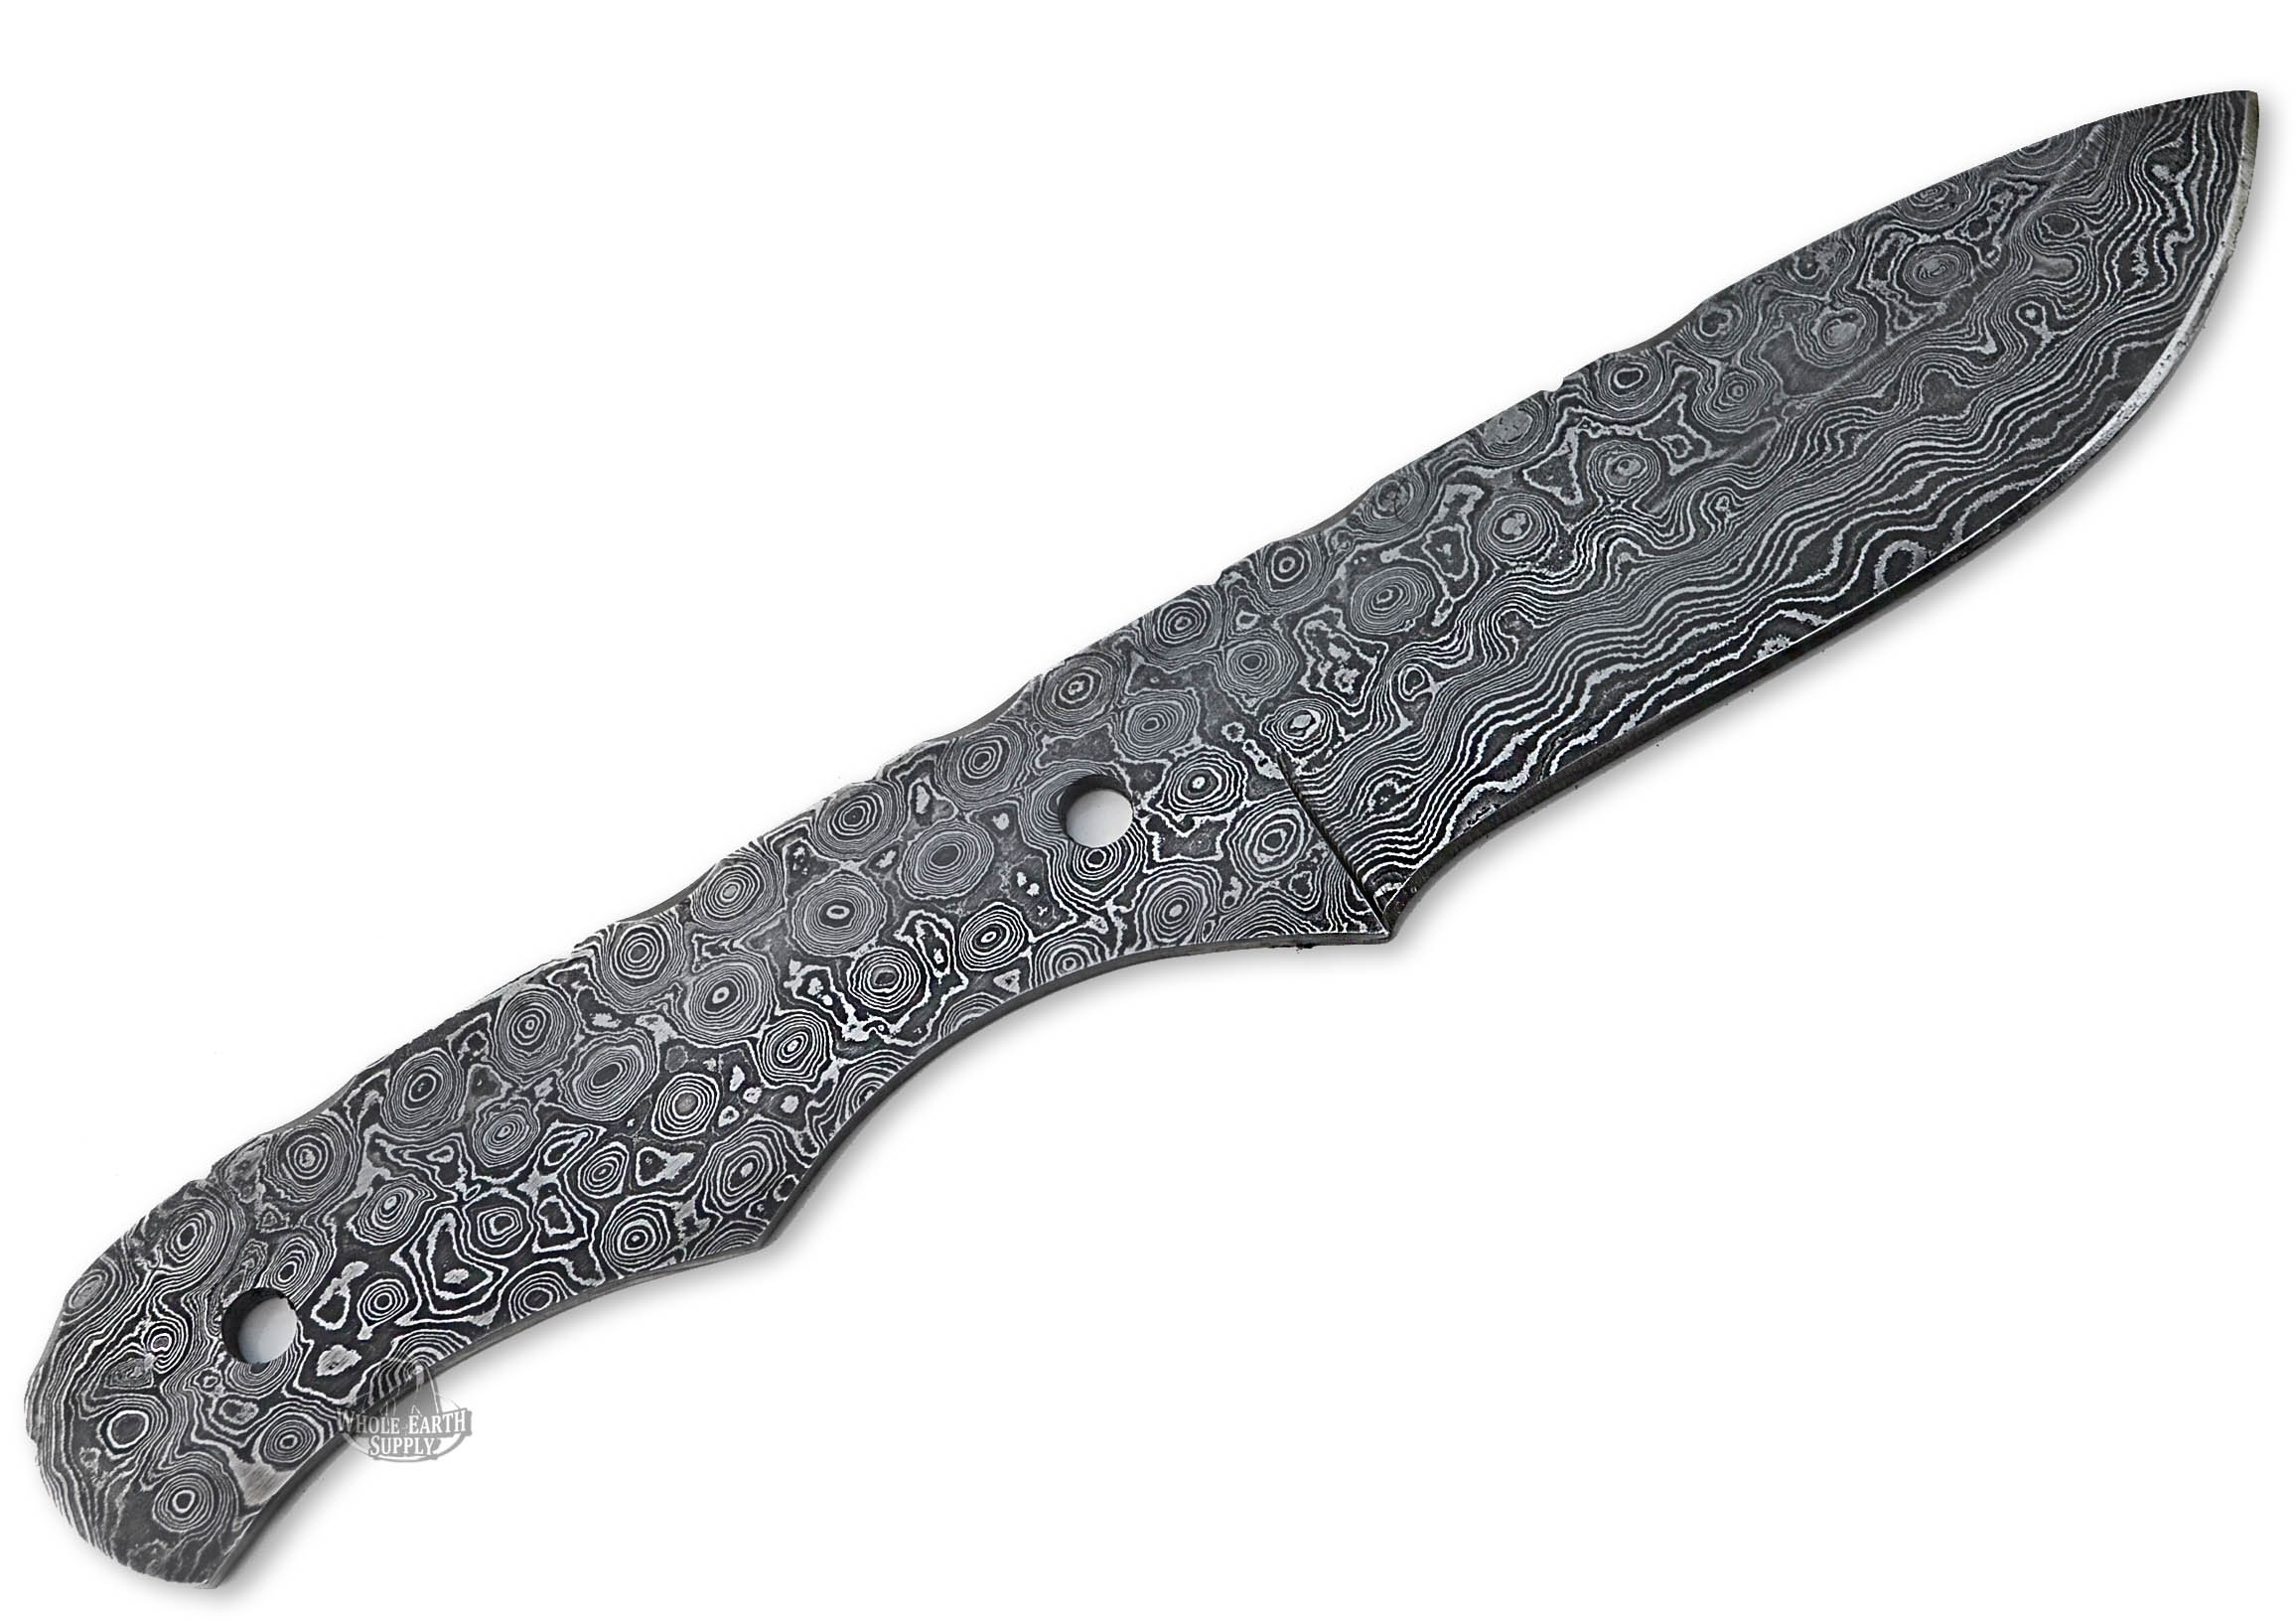 Large Damascus Drop Point Tactical Knife Blank Blade Hunting Skinning Skinner Steel